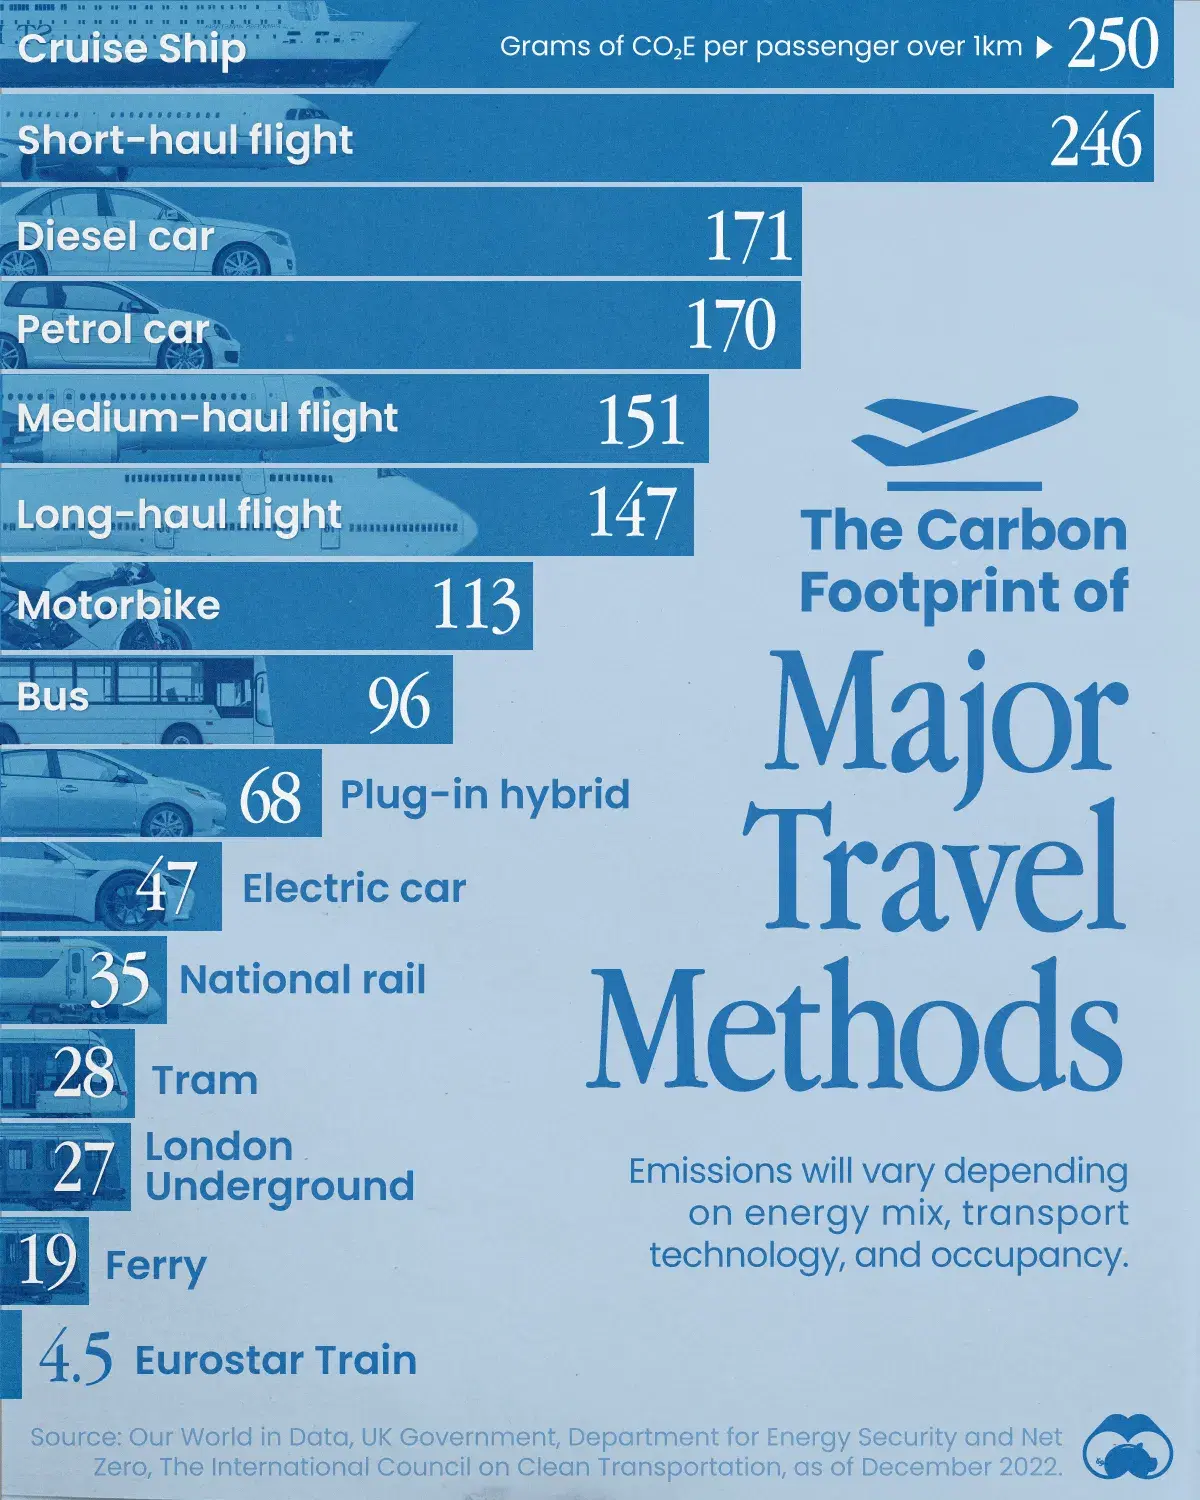 Cruise Ships Are The Most Carbon-Intensive Travel Method